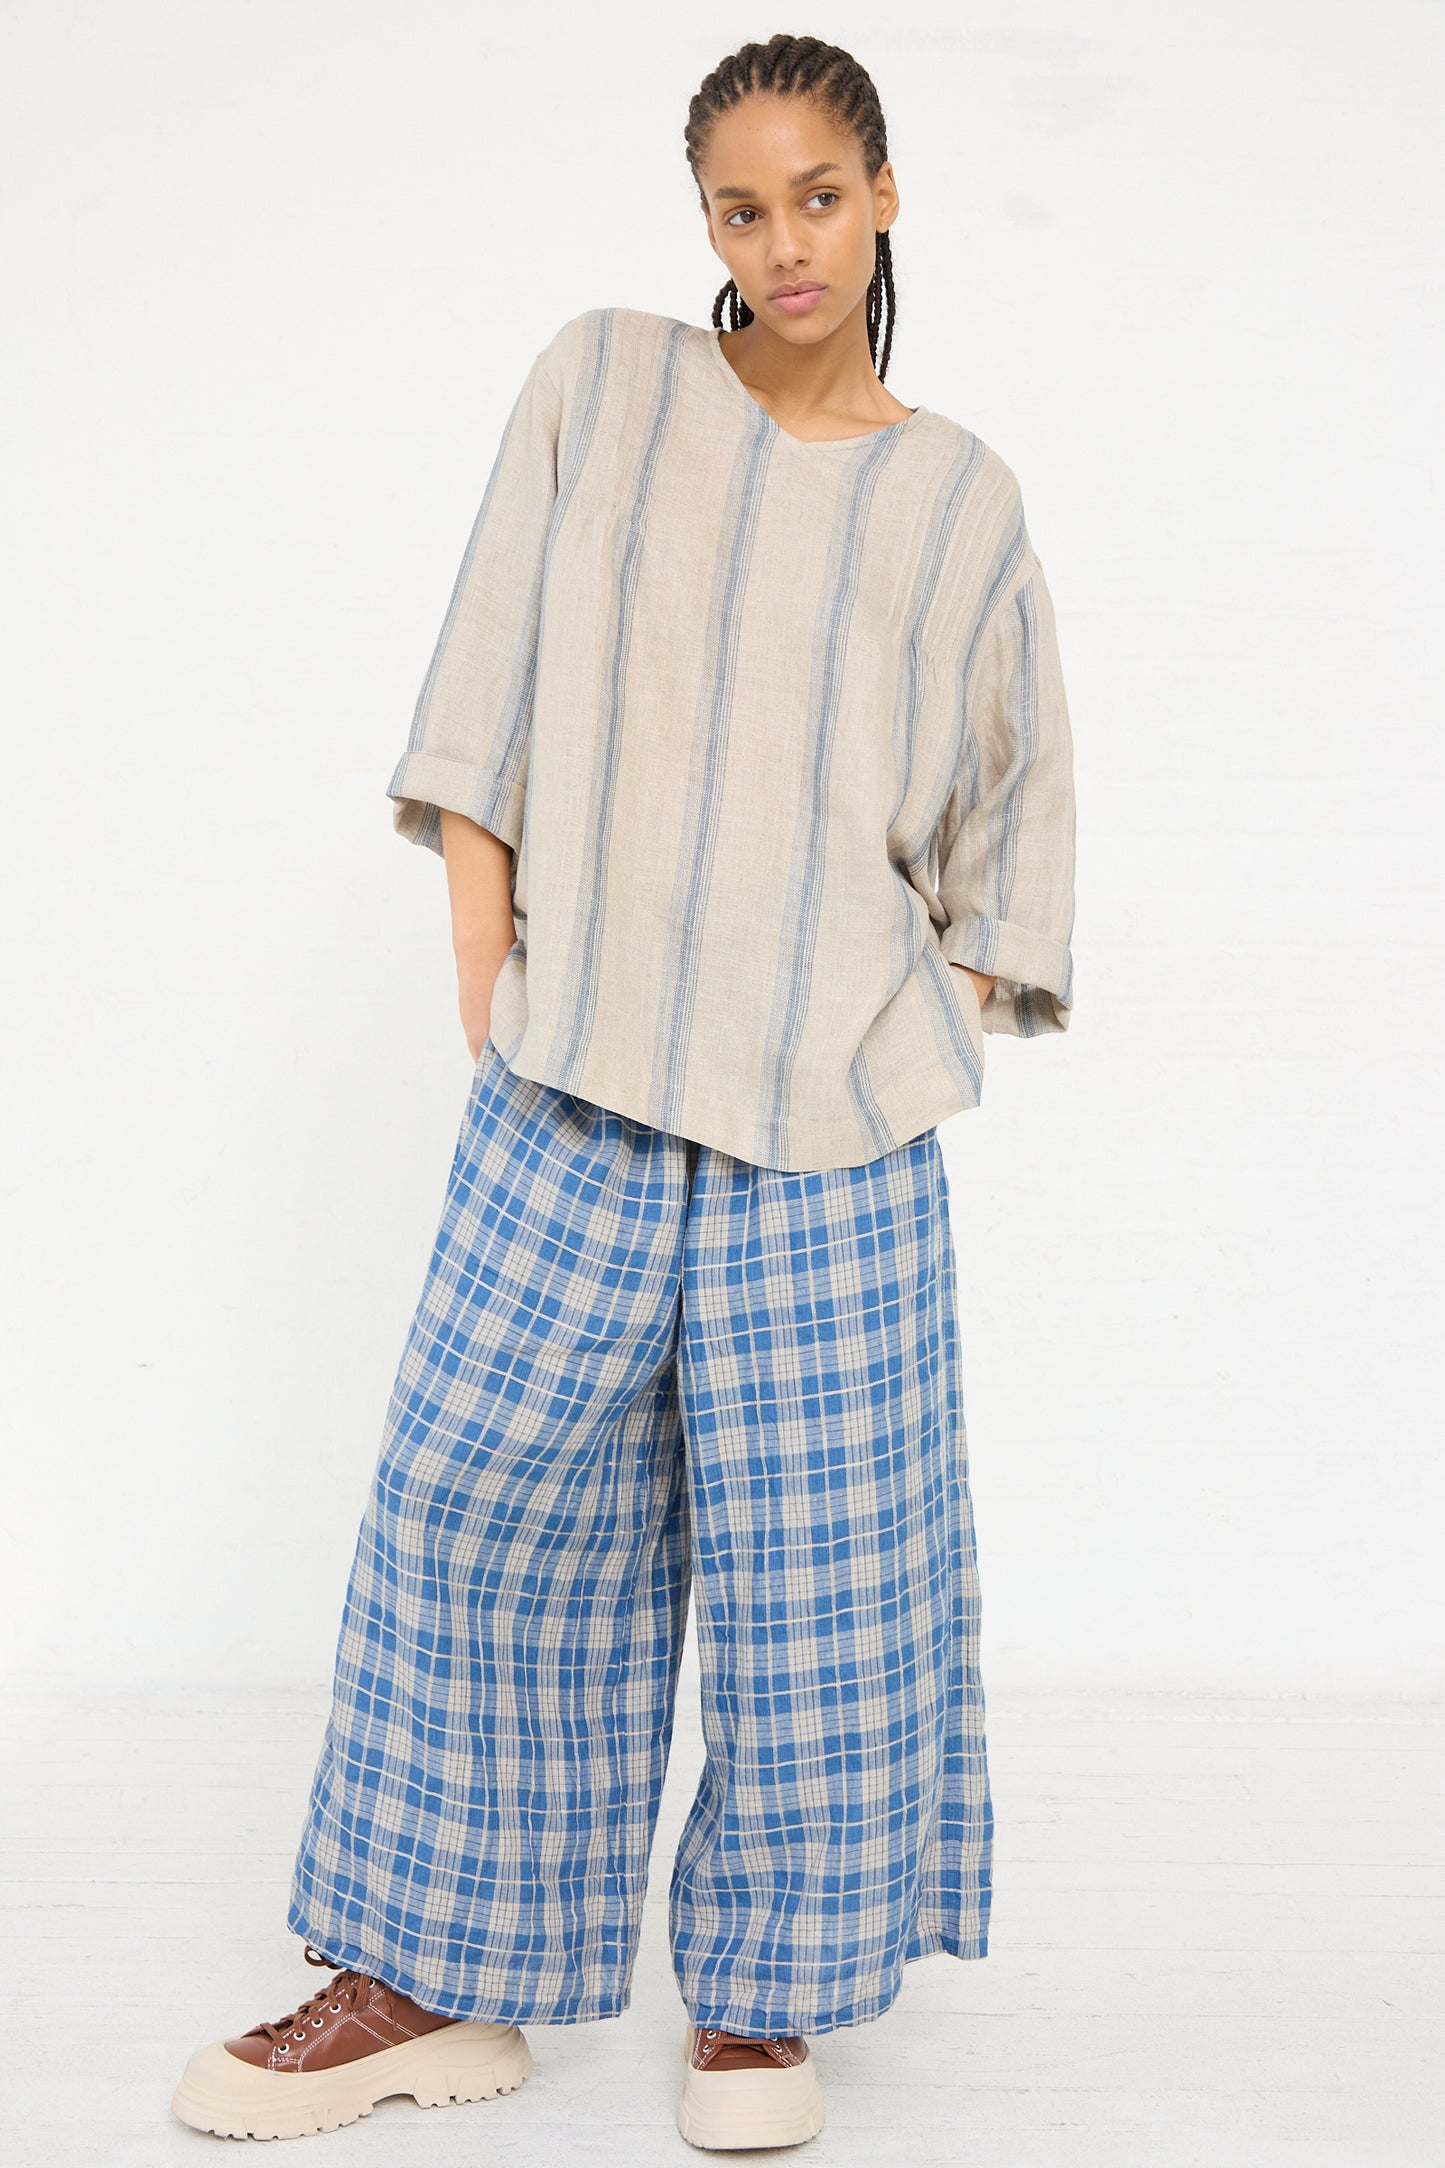 A person standing in a neutral pose wearing an Ichi Antiquités Linen Stripe Pullover in Natural and Indigo with wide blue checkered trousers and lace-up shoes.